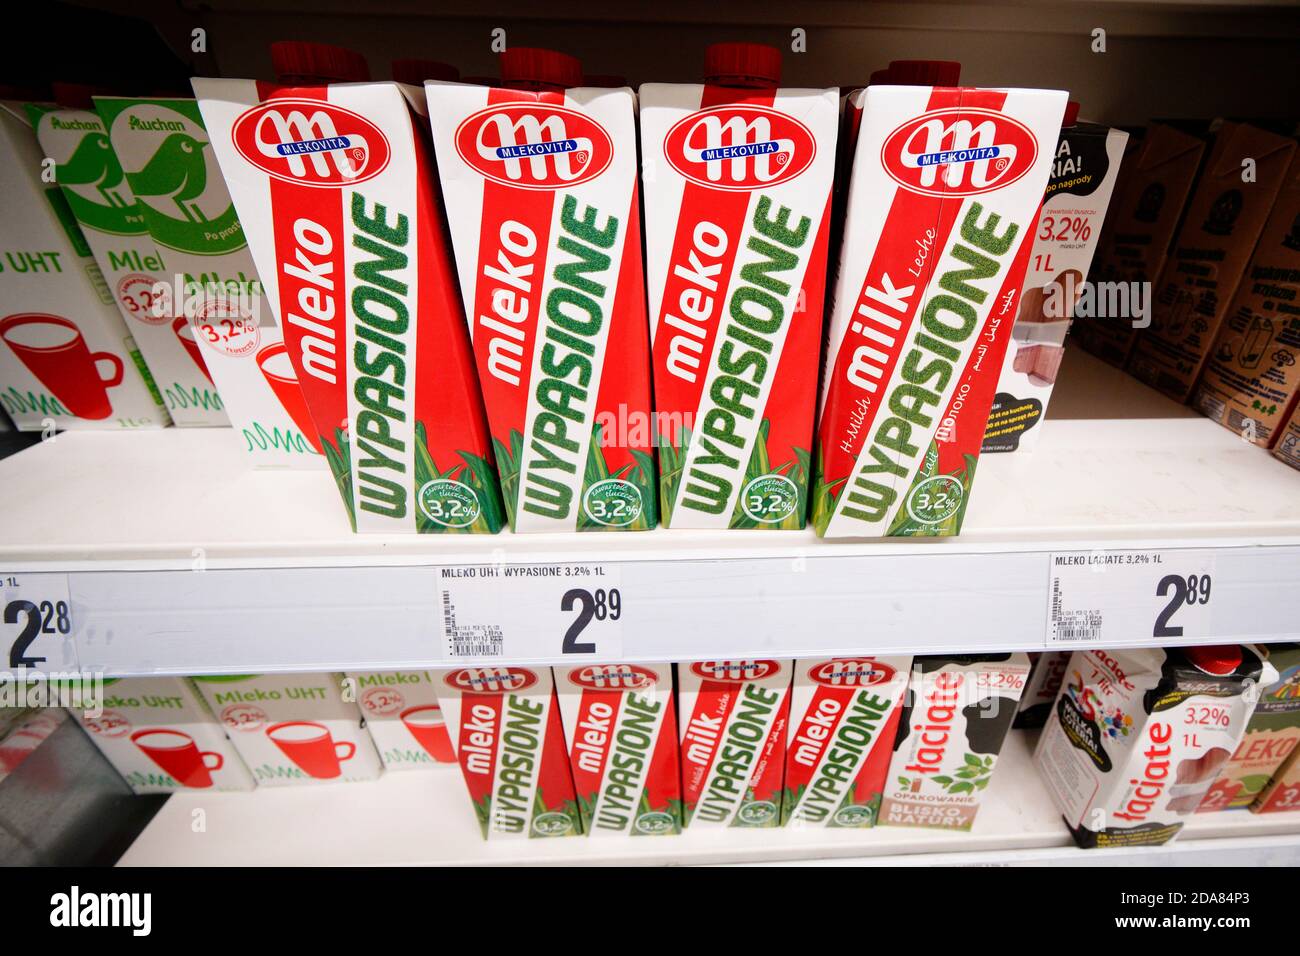 (201110) -- WARSAW, Nov. 10, 2020 (Xinhua) -- Boxes of Mlekovita milk are seen on shelves at a supermarket in Warsaw, Poland, Nov. 5, 2020. The European Union (EU) is one of the largest milk suppliers to Chinese market, with Poland accounting for a share of 12.7%, according to Director of Polish Milk Chamber Agnieszka Maliszewska. Statistics from Poland's Ministry of Finance show that, despite the impact of COVID-19, the export of dairy products from Poland to China grew by 70% year on year in the first half of 2020. Recently, batches of Polish dairy products took freight trains to Chin Stock Photo